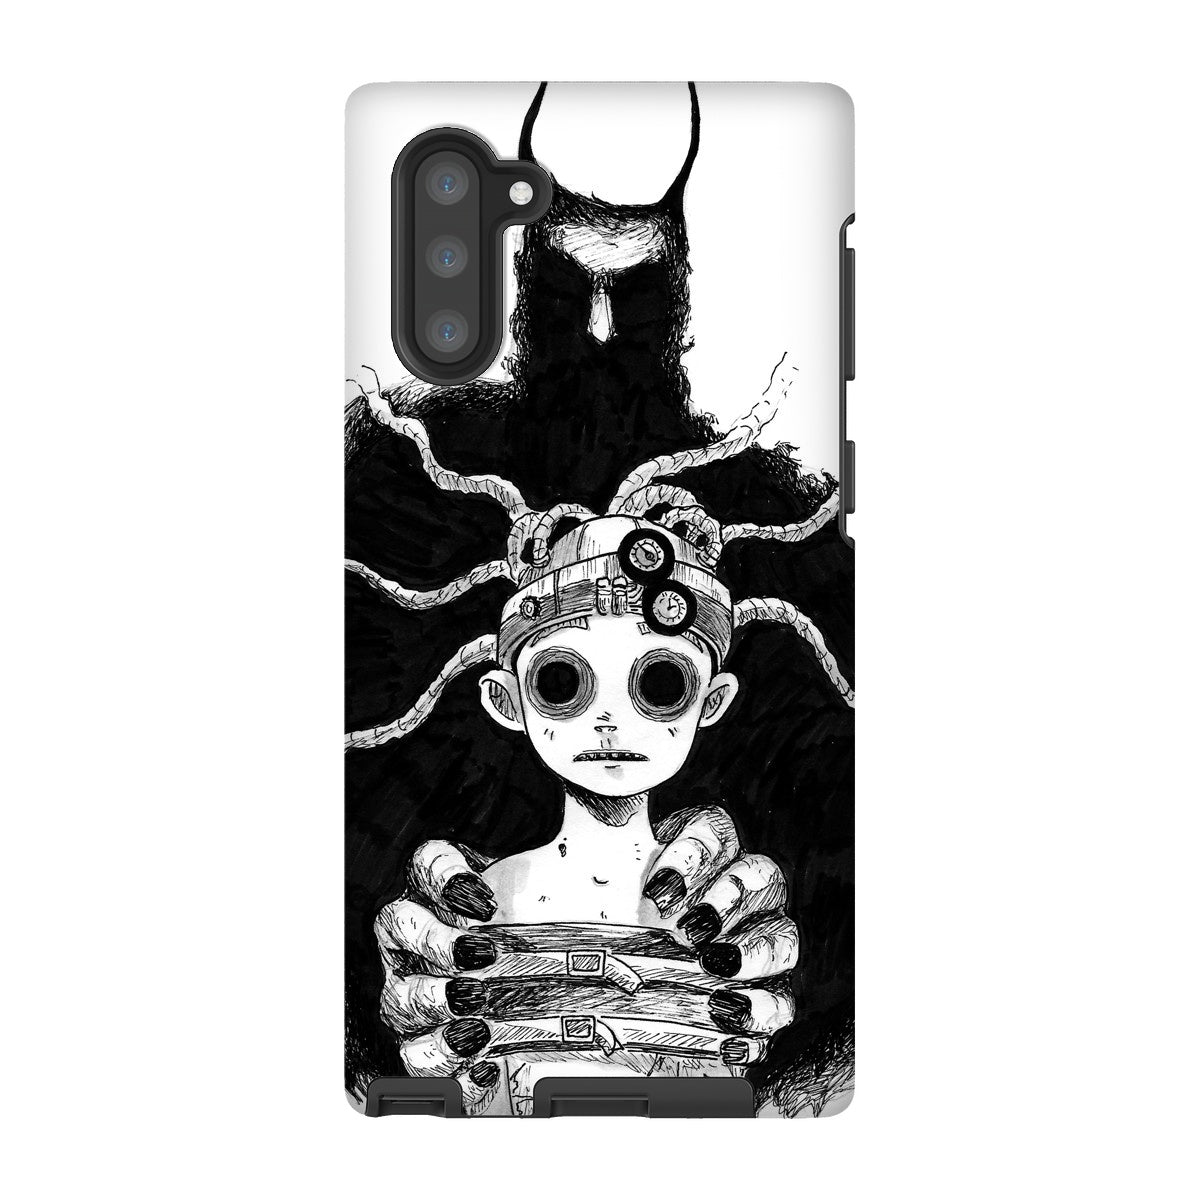 Chained Tough Phone Case.